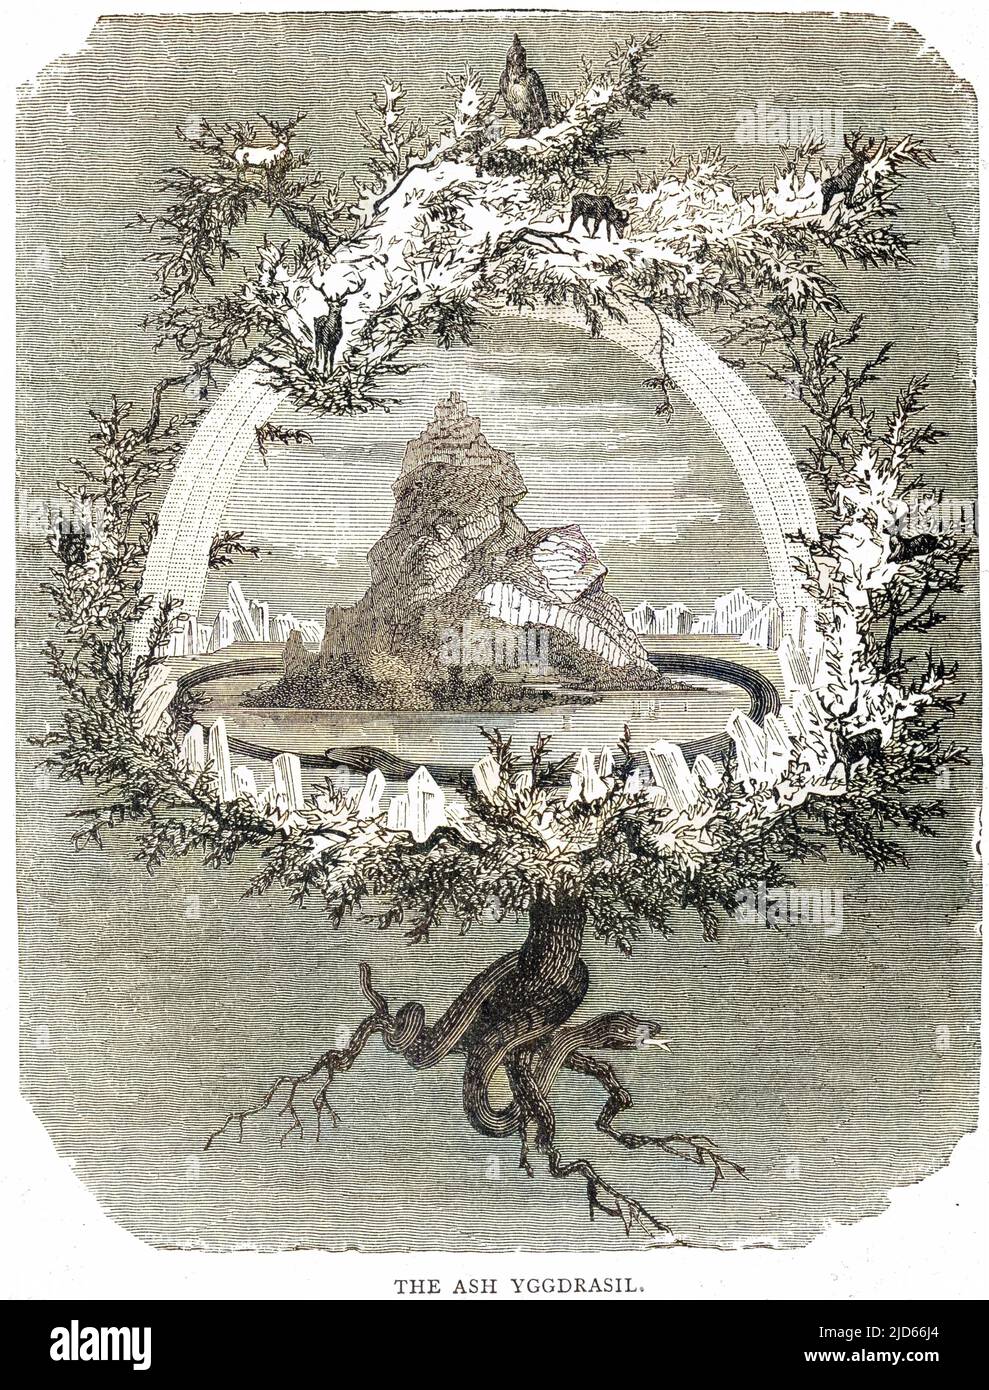 Yggdrasil (Yggdrasill), the sacred ash, the Tree of Life, the Mundane Tree of Norse mythology, whose branches overhang the Universe. Colourised version of : 10007712       Date: 1886 Stock Photo